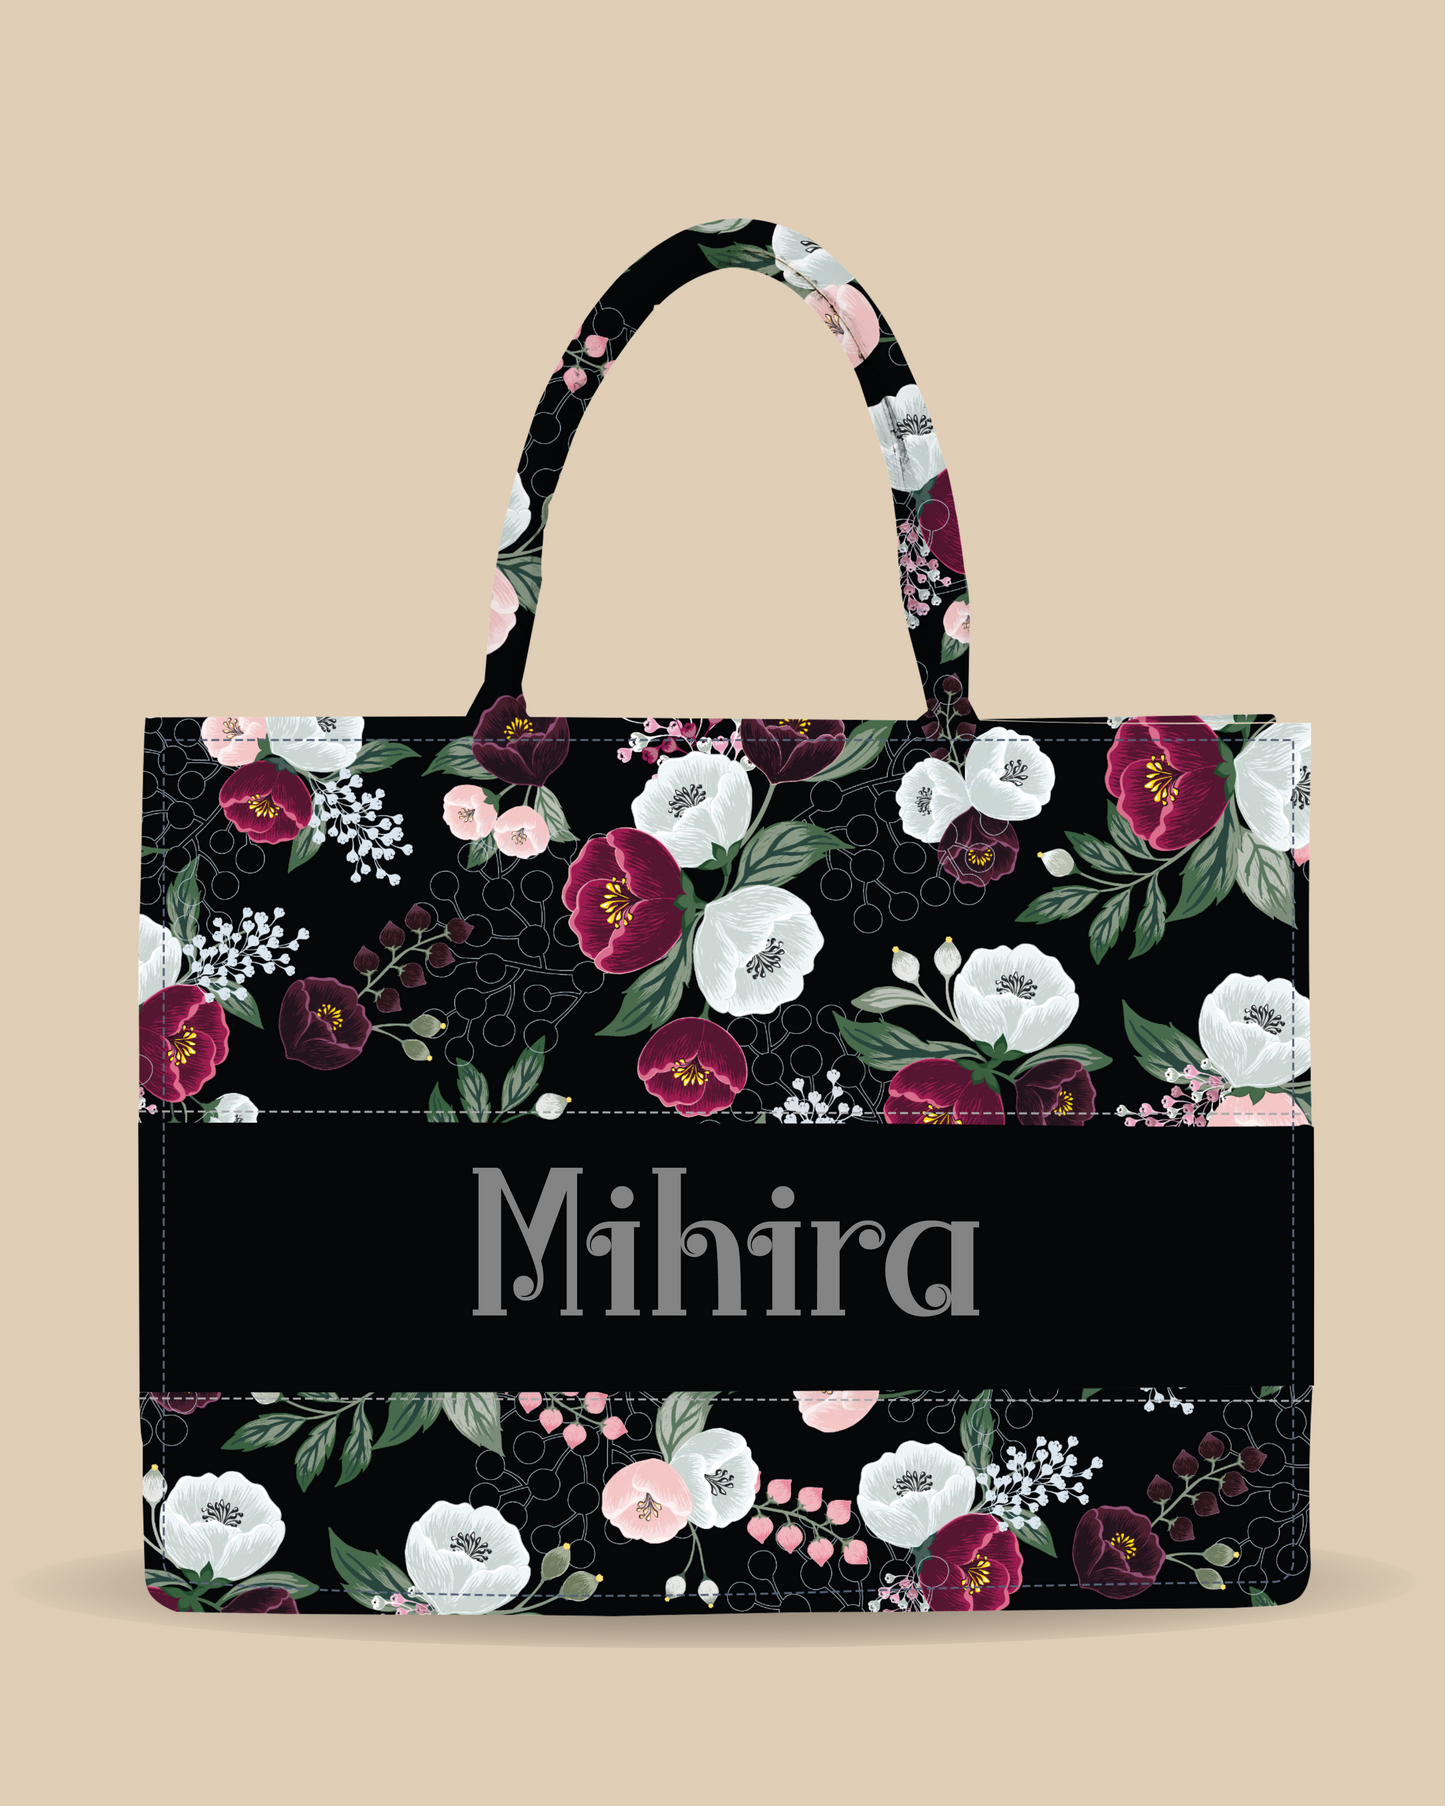 Customized Tote Bag Designed With Decorative Wild Peone Flowers